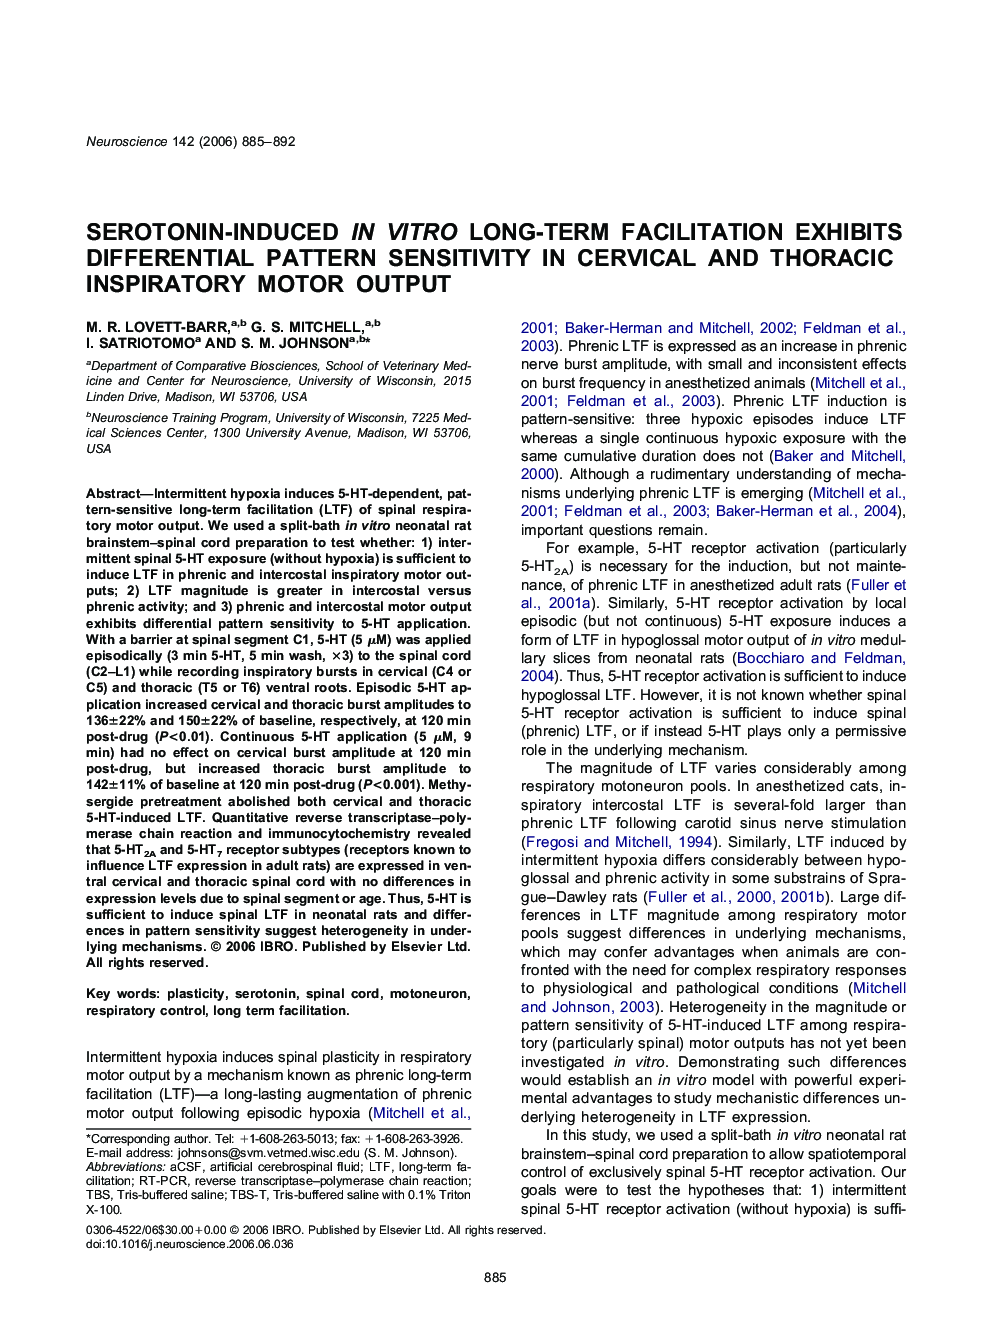 Serotonin-induced in vitro long-term facilitation exhibits differential pattern sensitivity in cervical and thoracic inspiratory motor output